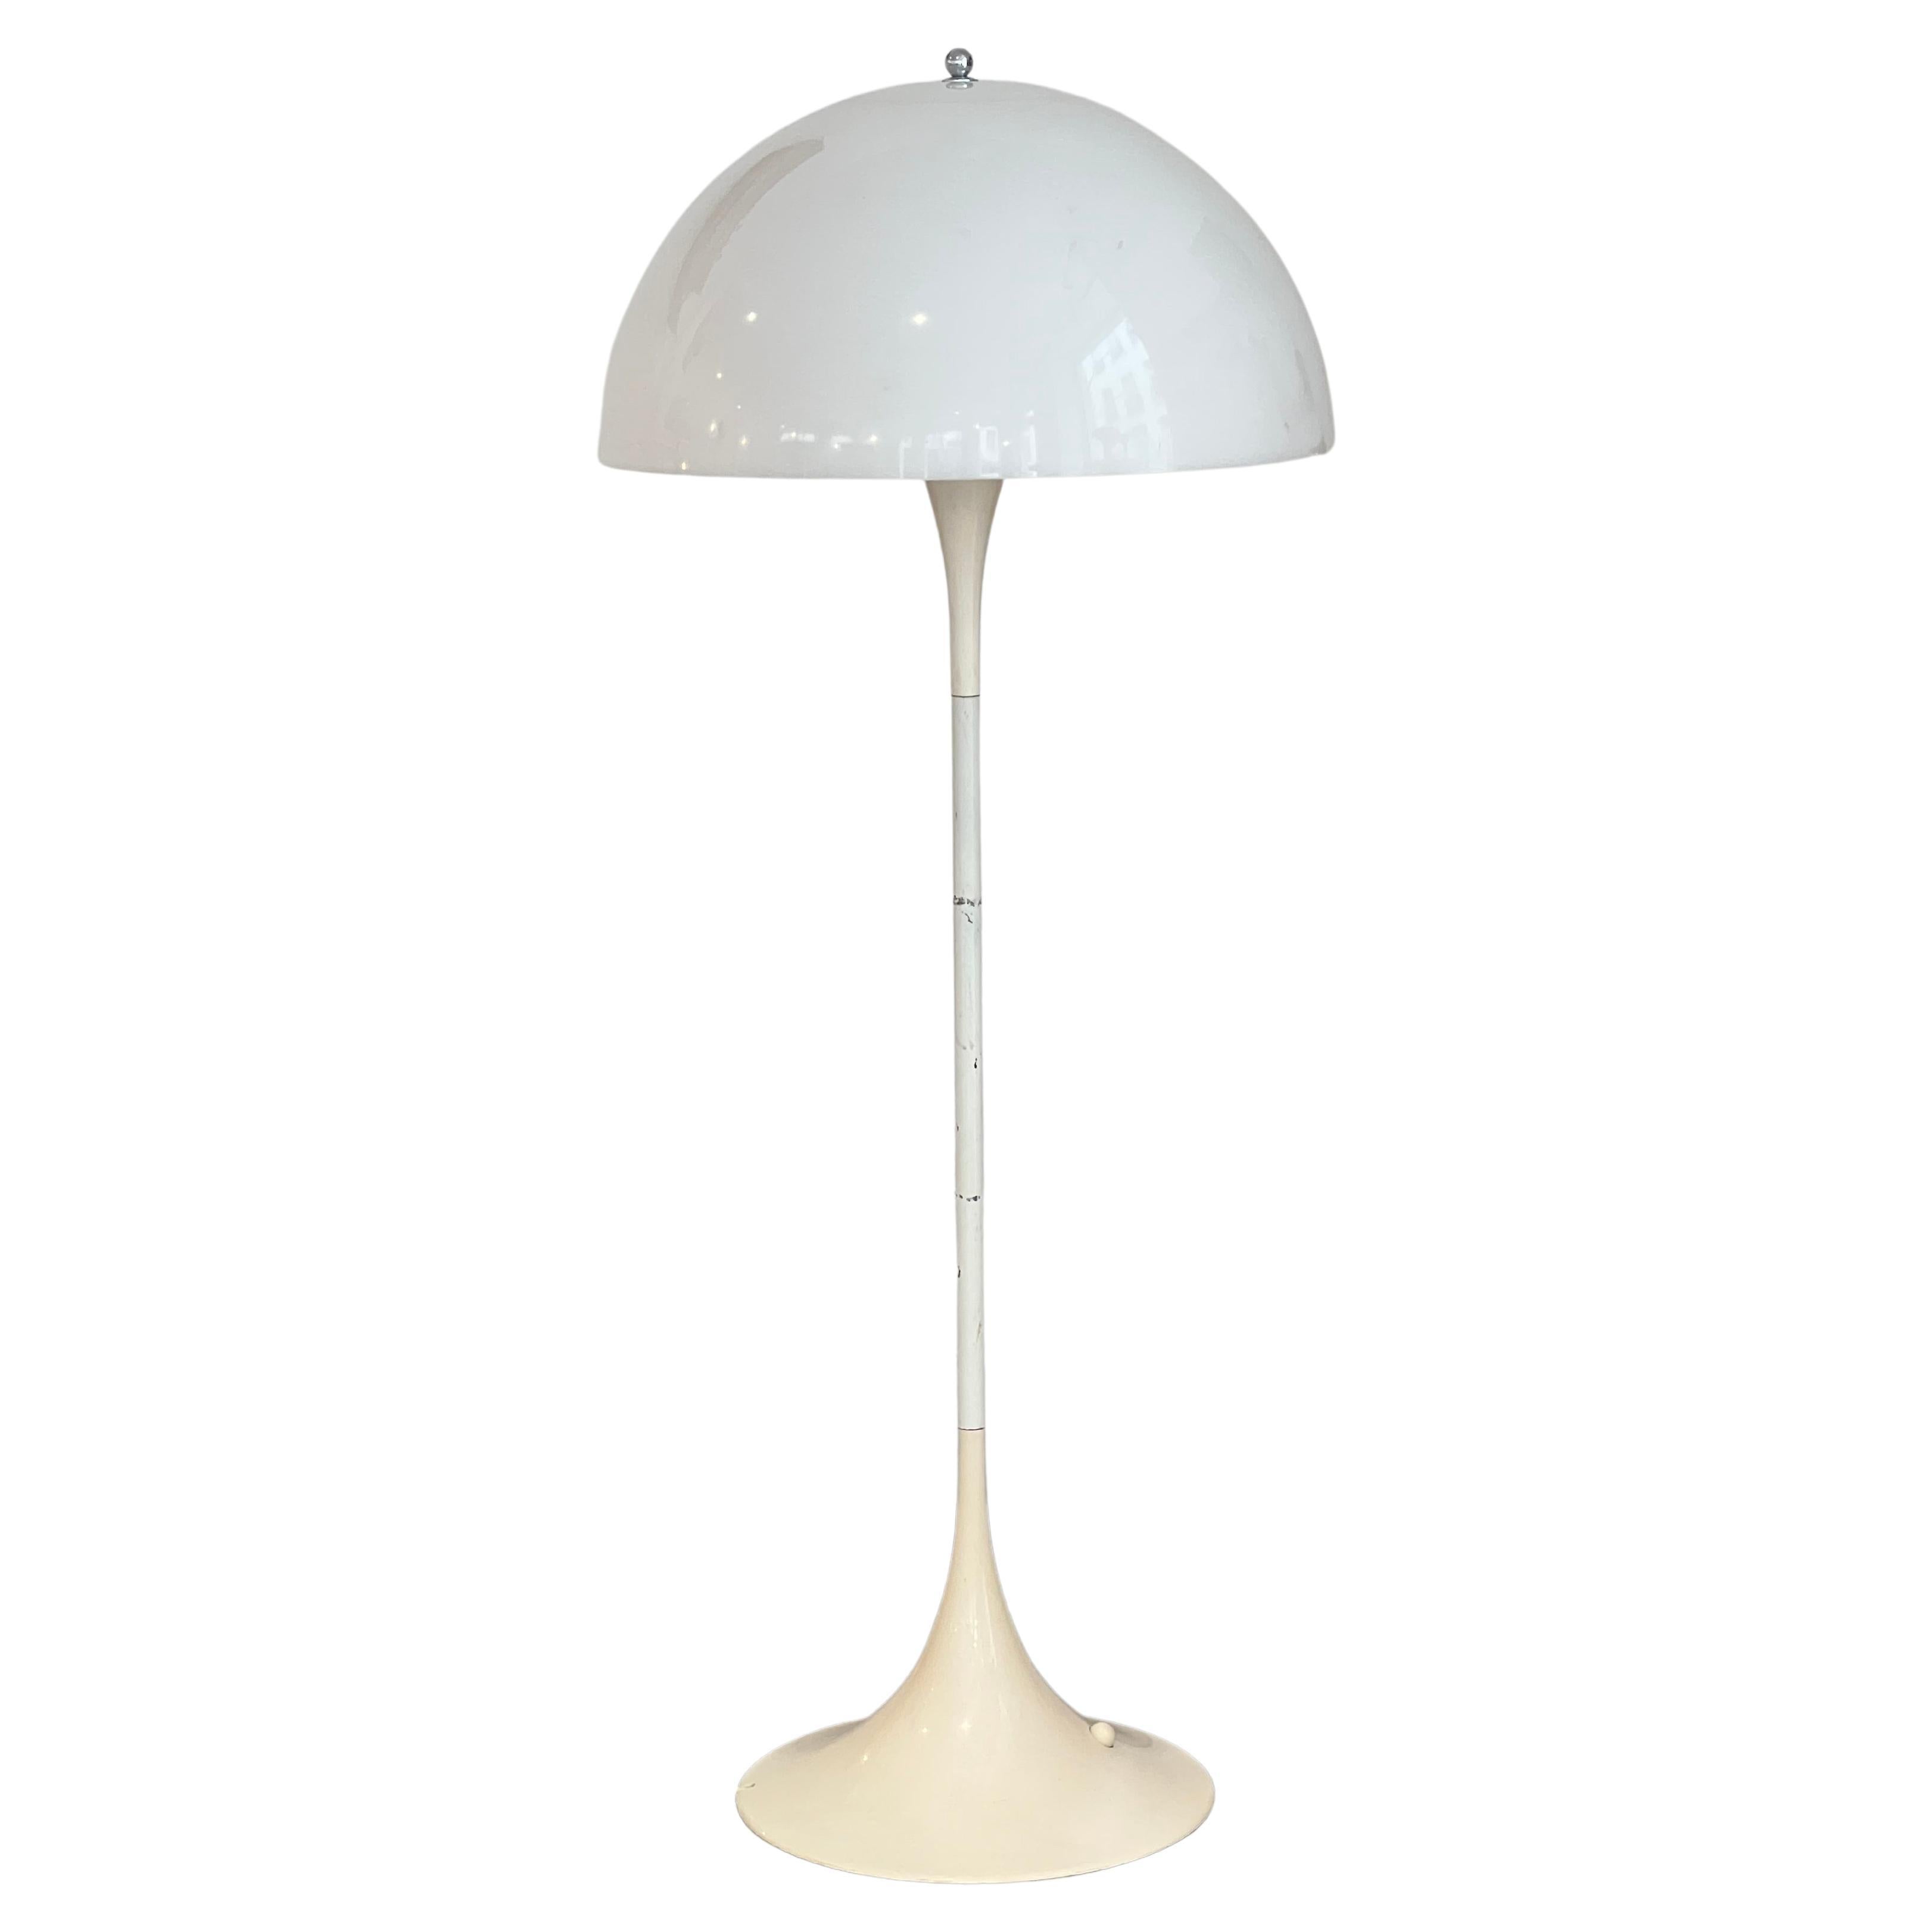 Panthella floor lamp by Verner Panton in collaboration with Louis Poulsen 1971 For Sale